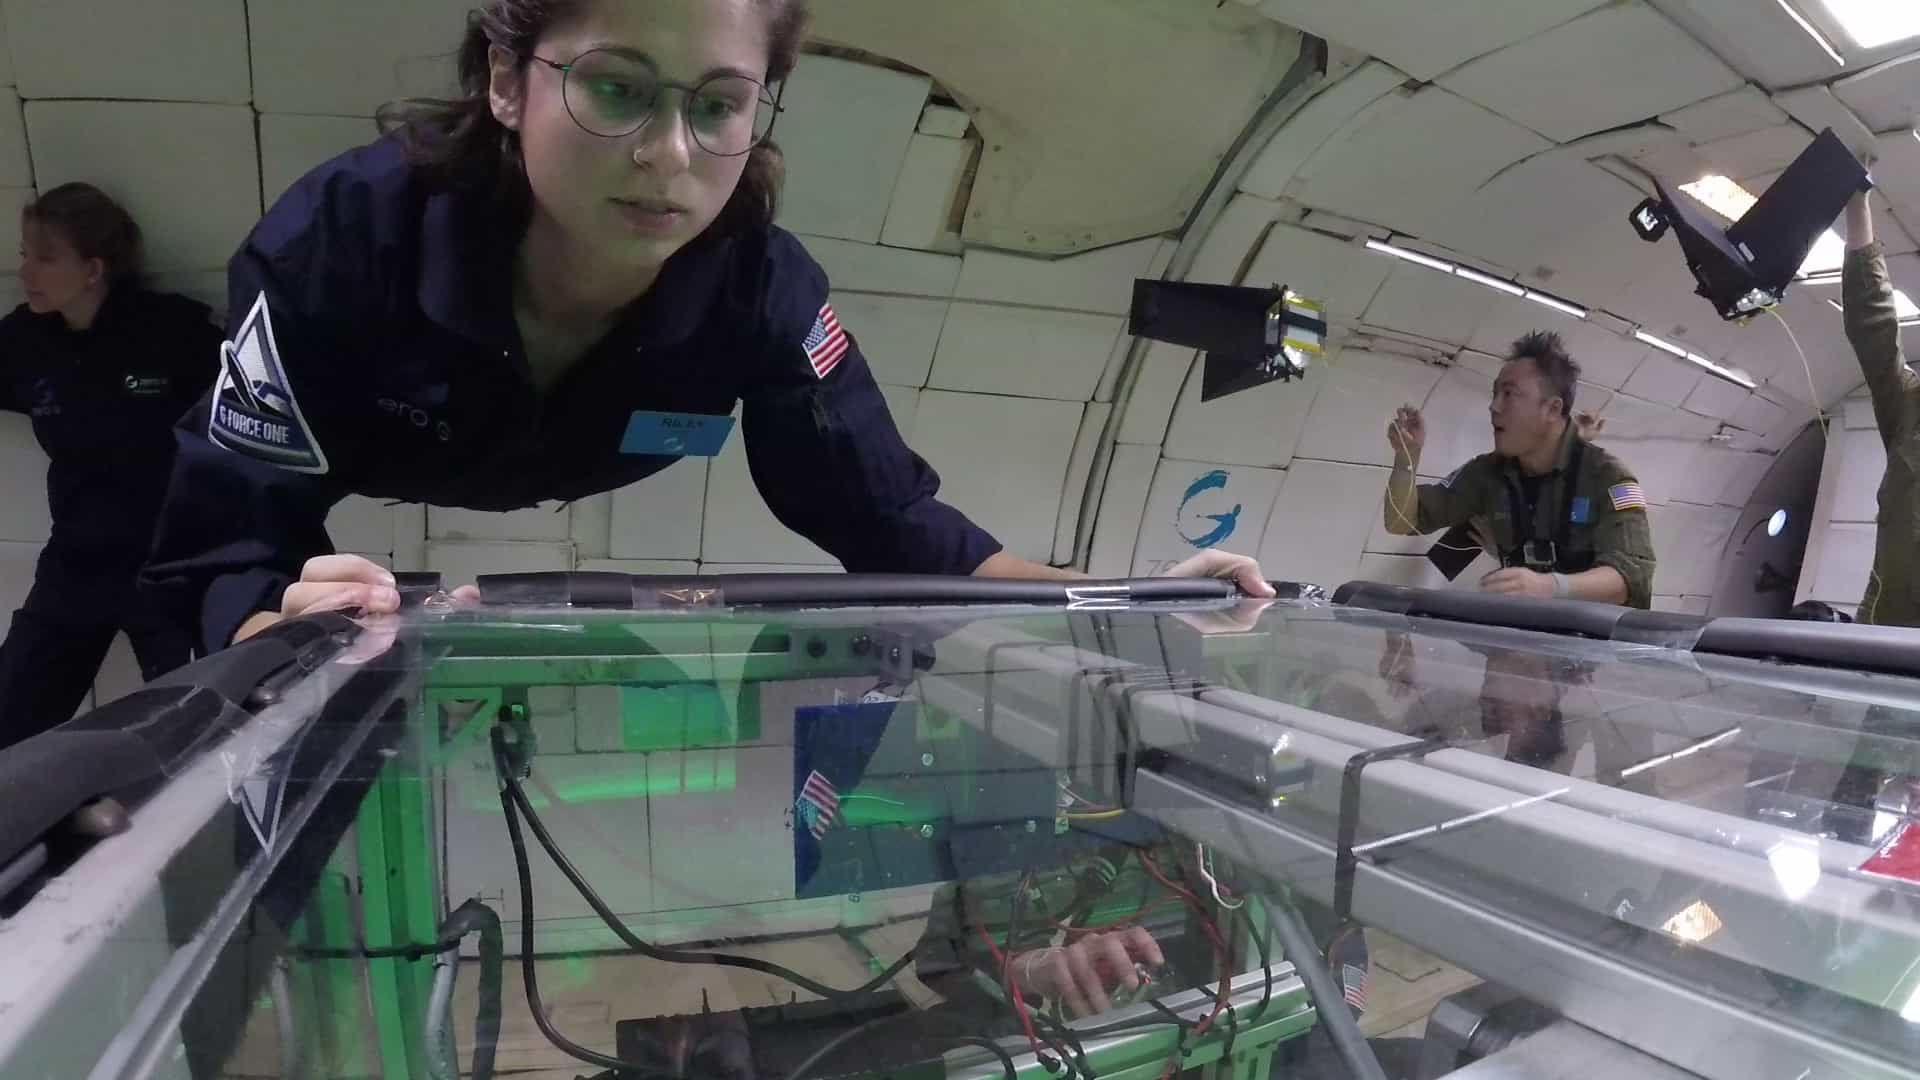 A student floats above an experimental apparatus onboard a zero-gravity research flight